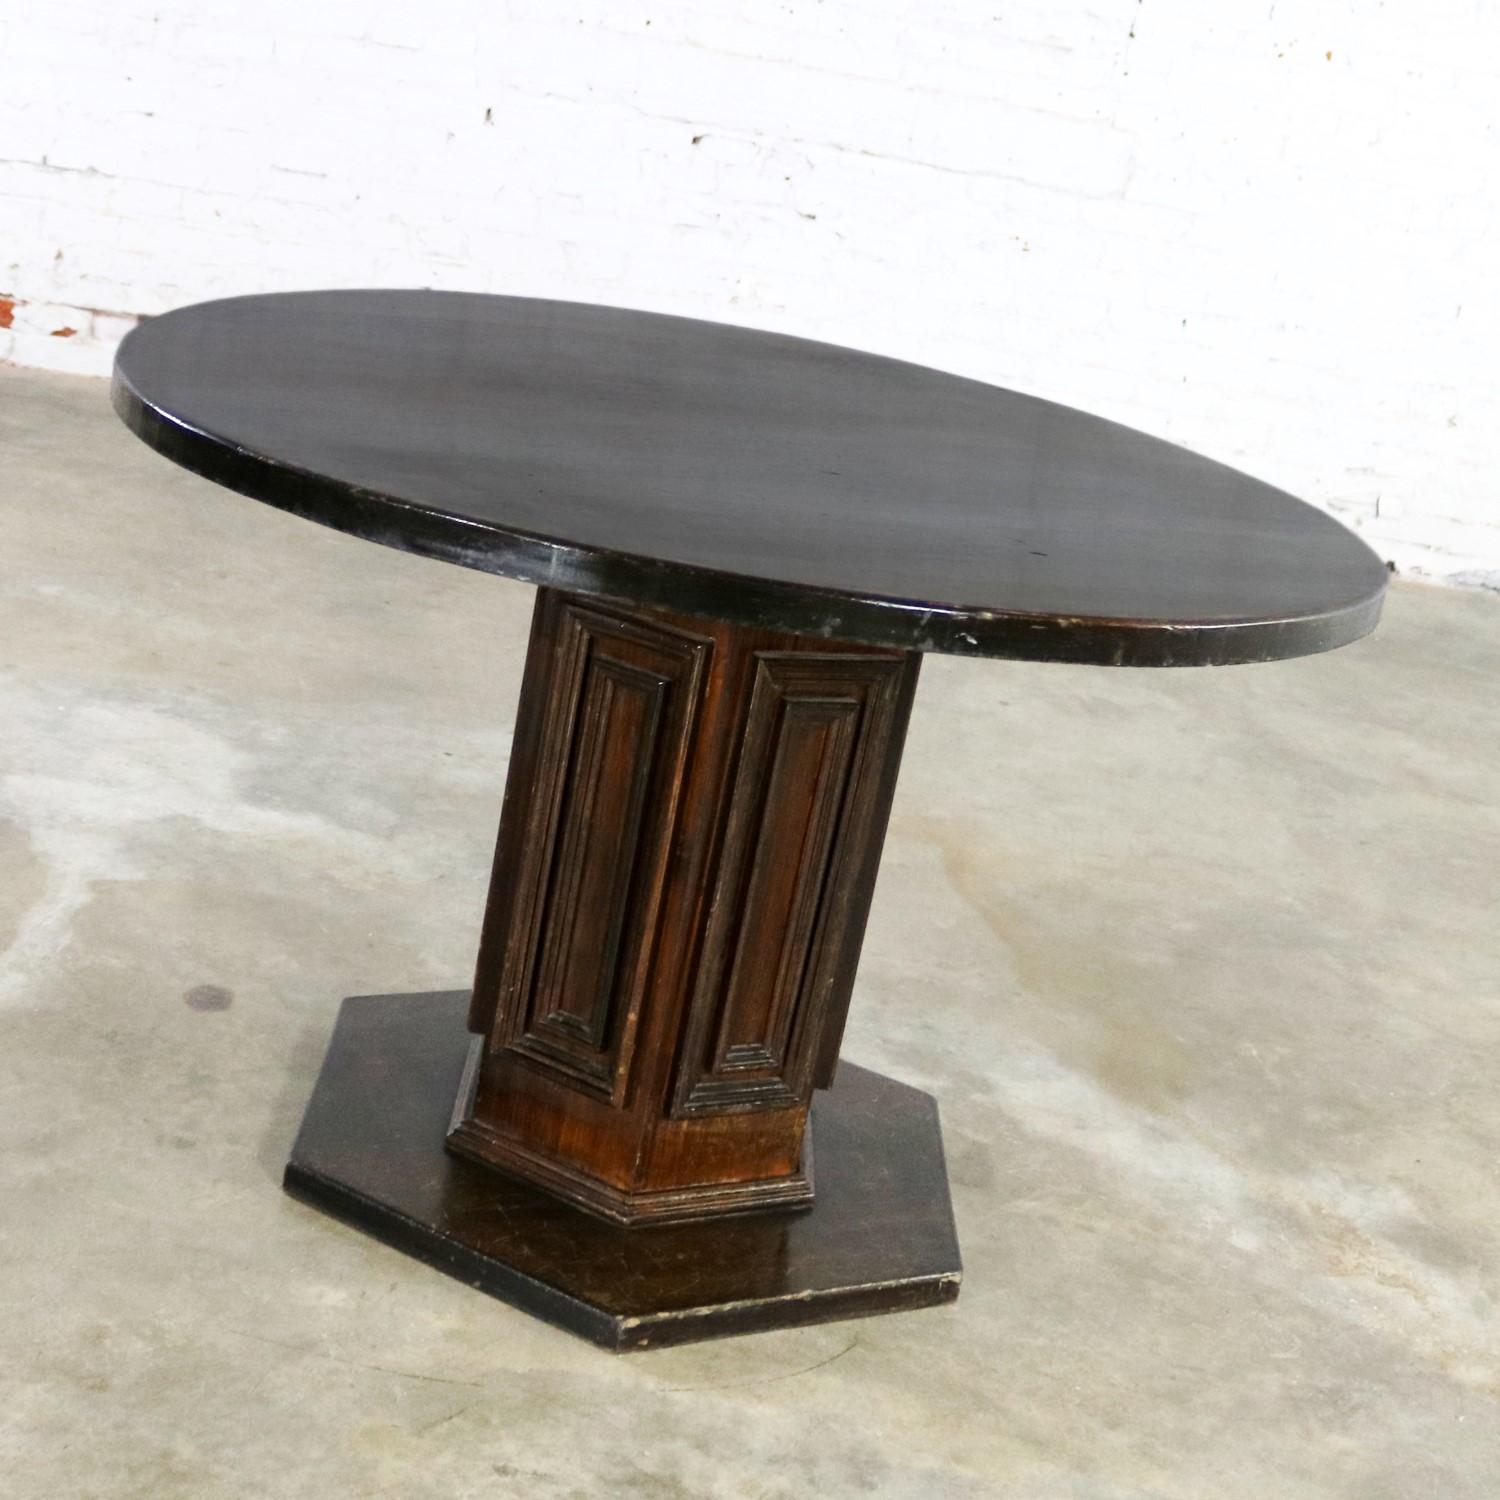 Wood Spanish Revival Style Round Dining Table Single Pedestal Artes de Mexico